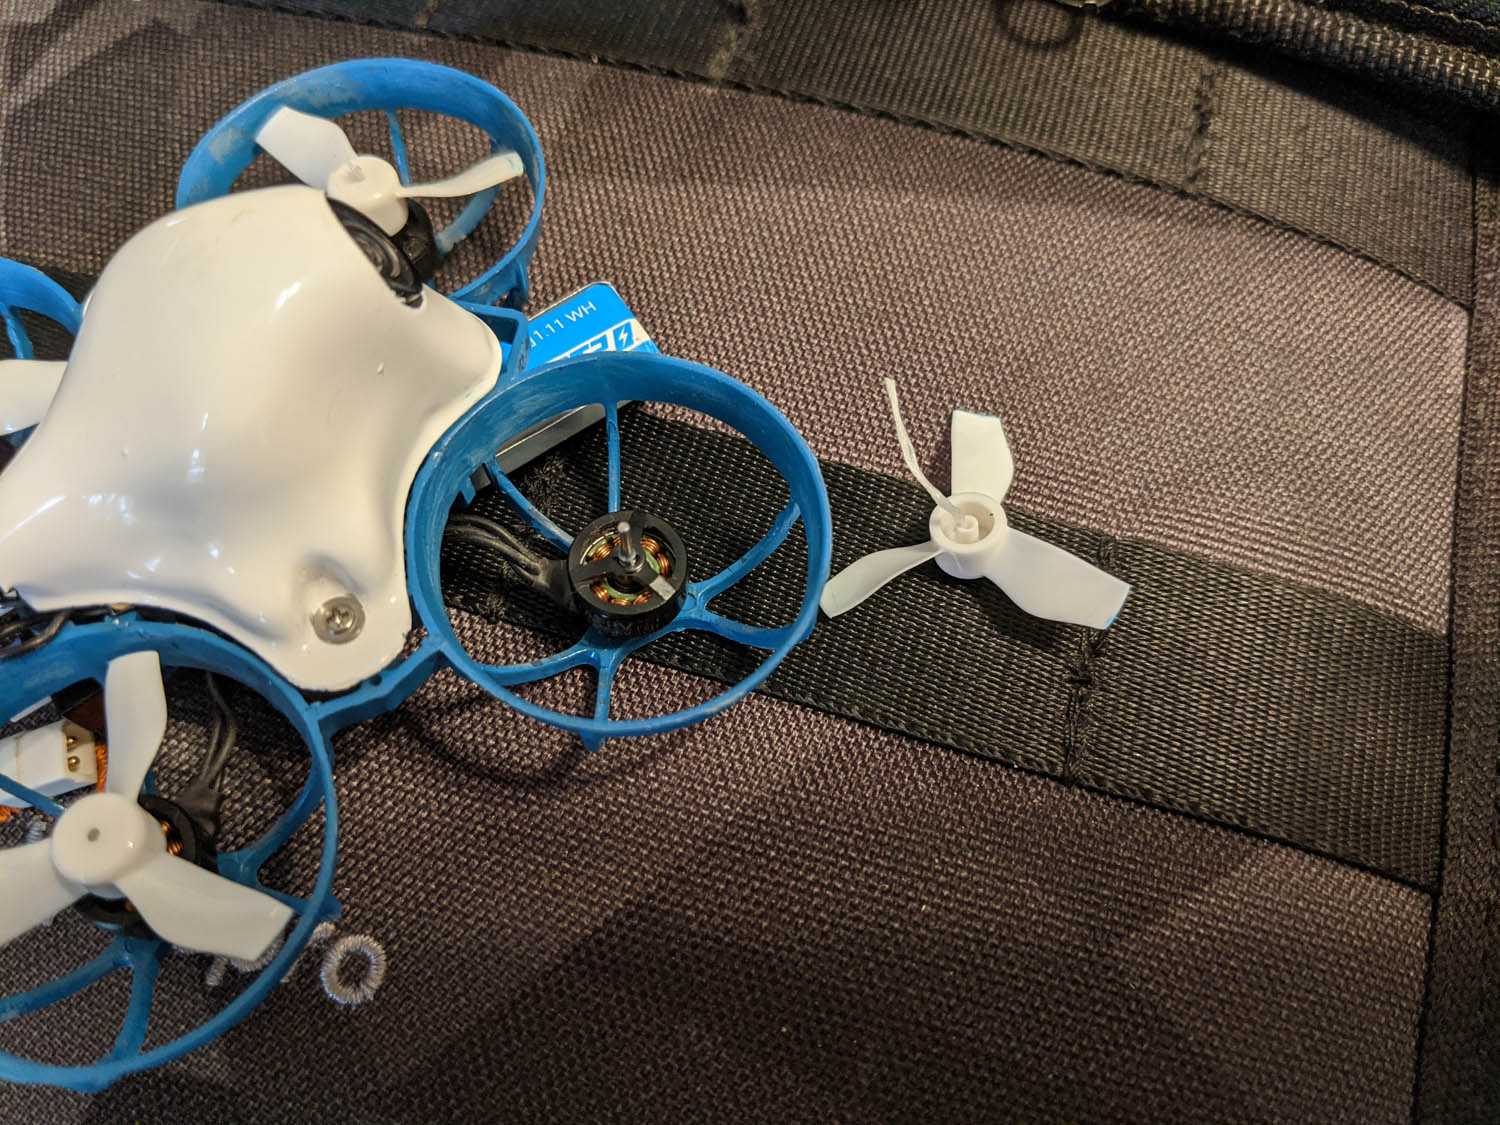 Quick Tip: Stop losing props on your micro quad